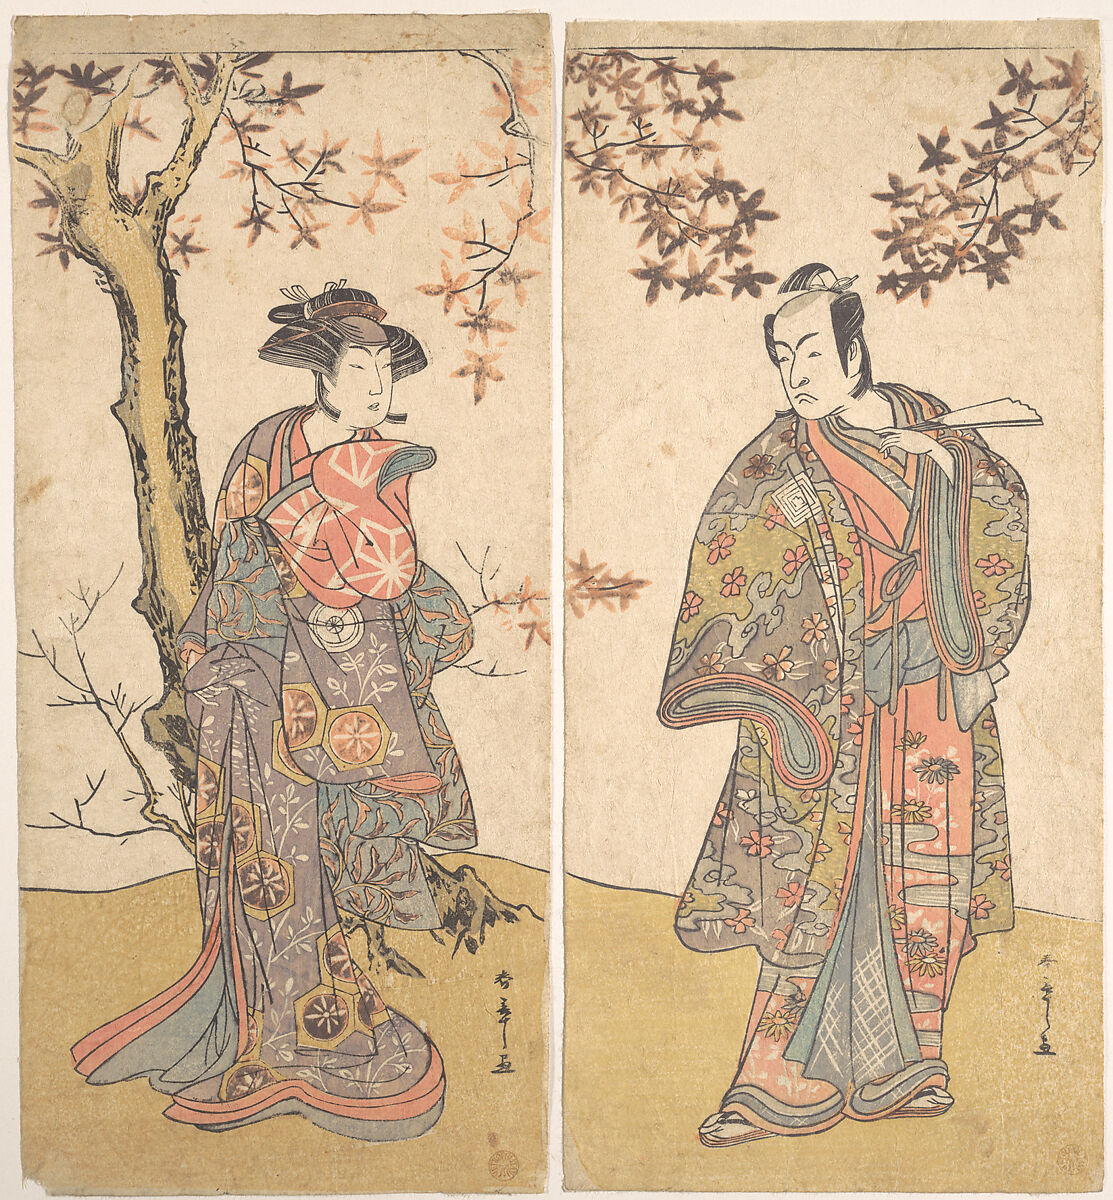 The Second Ichikawa Monnosuke as an Unarmed Man, Katsukawa Shunshō　勝川春章 (Japanese, 1726–1792), Diptych (probably two sheets of a triptych) of woodblock prints (nishiki-e); ink and color on paper, Japan 